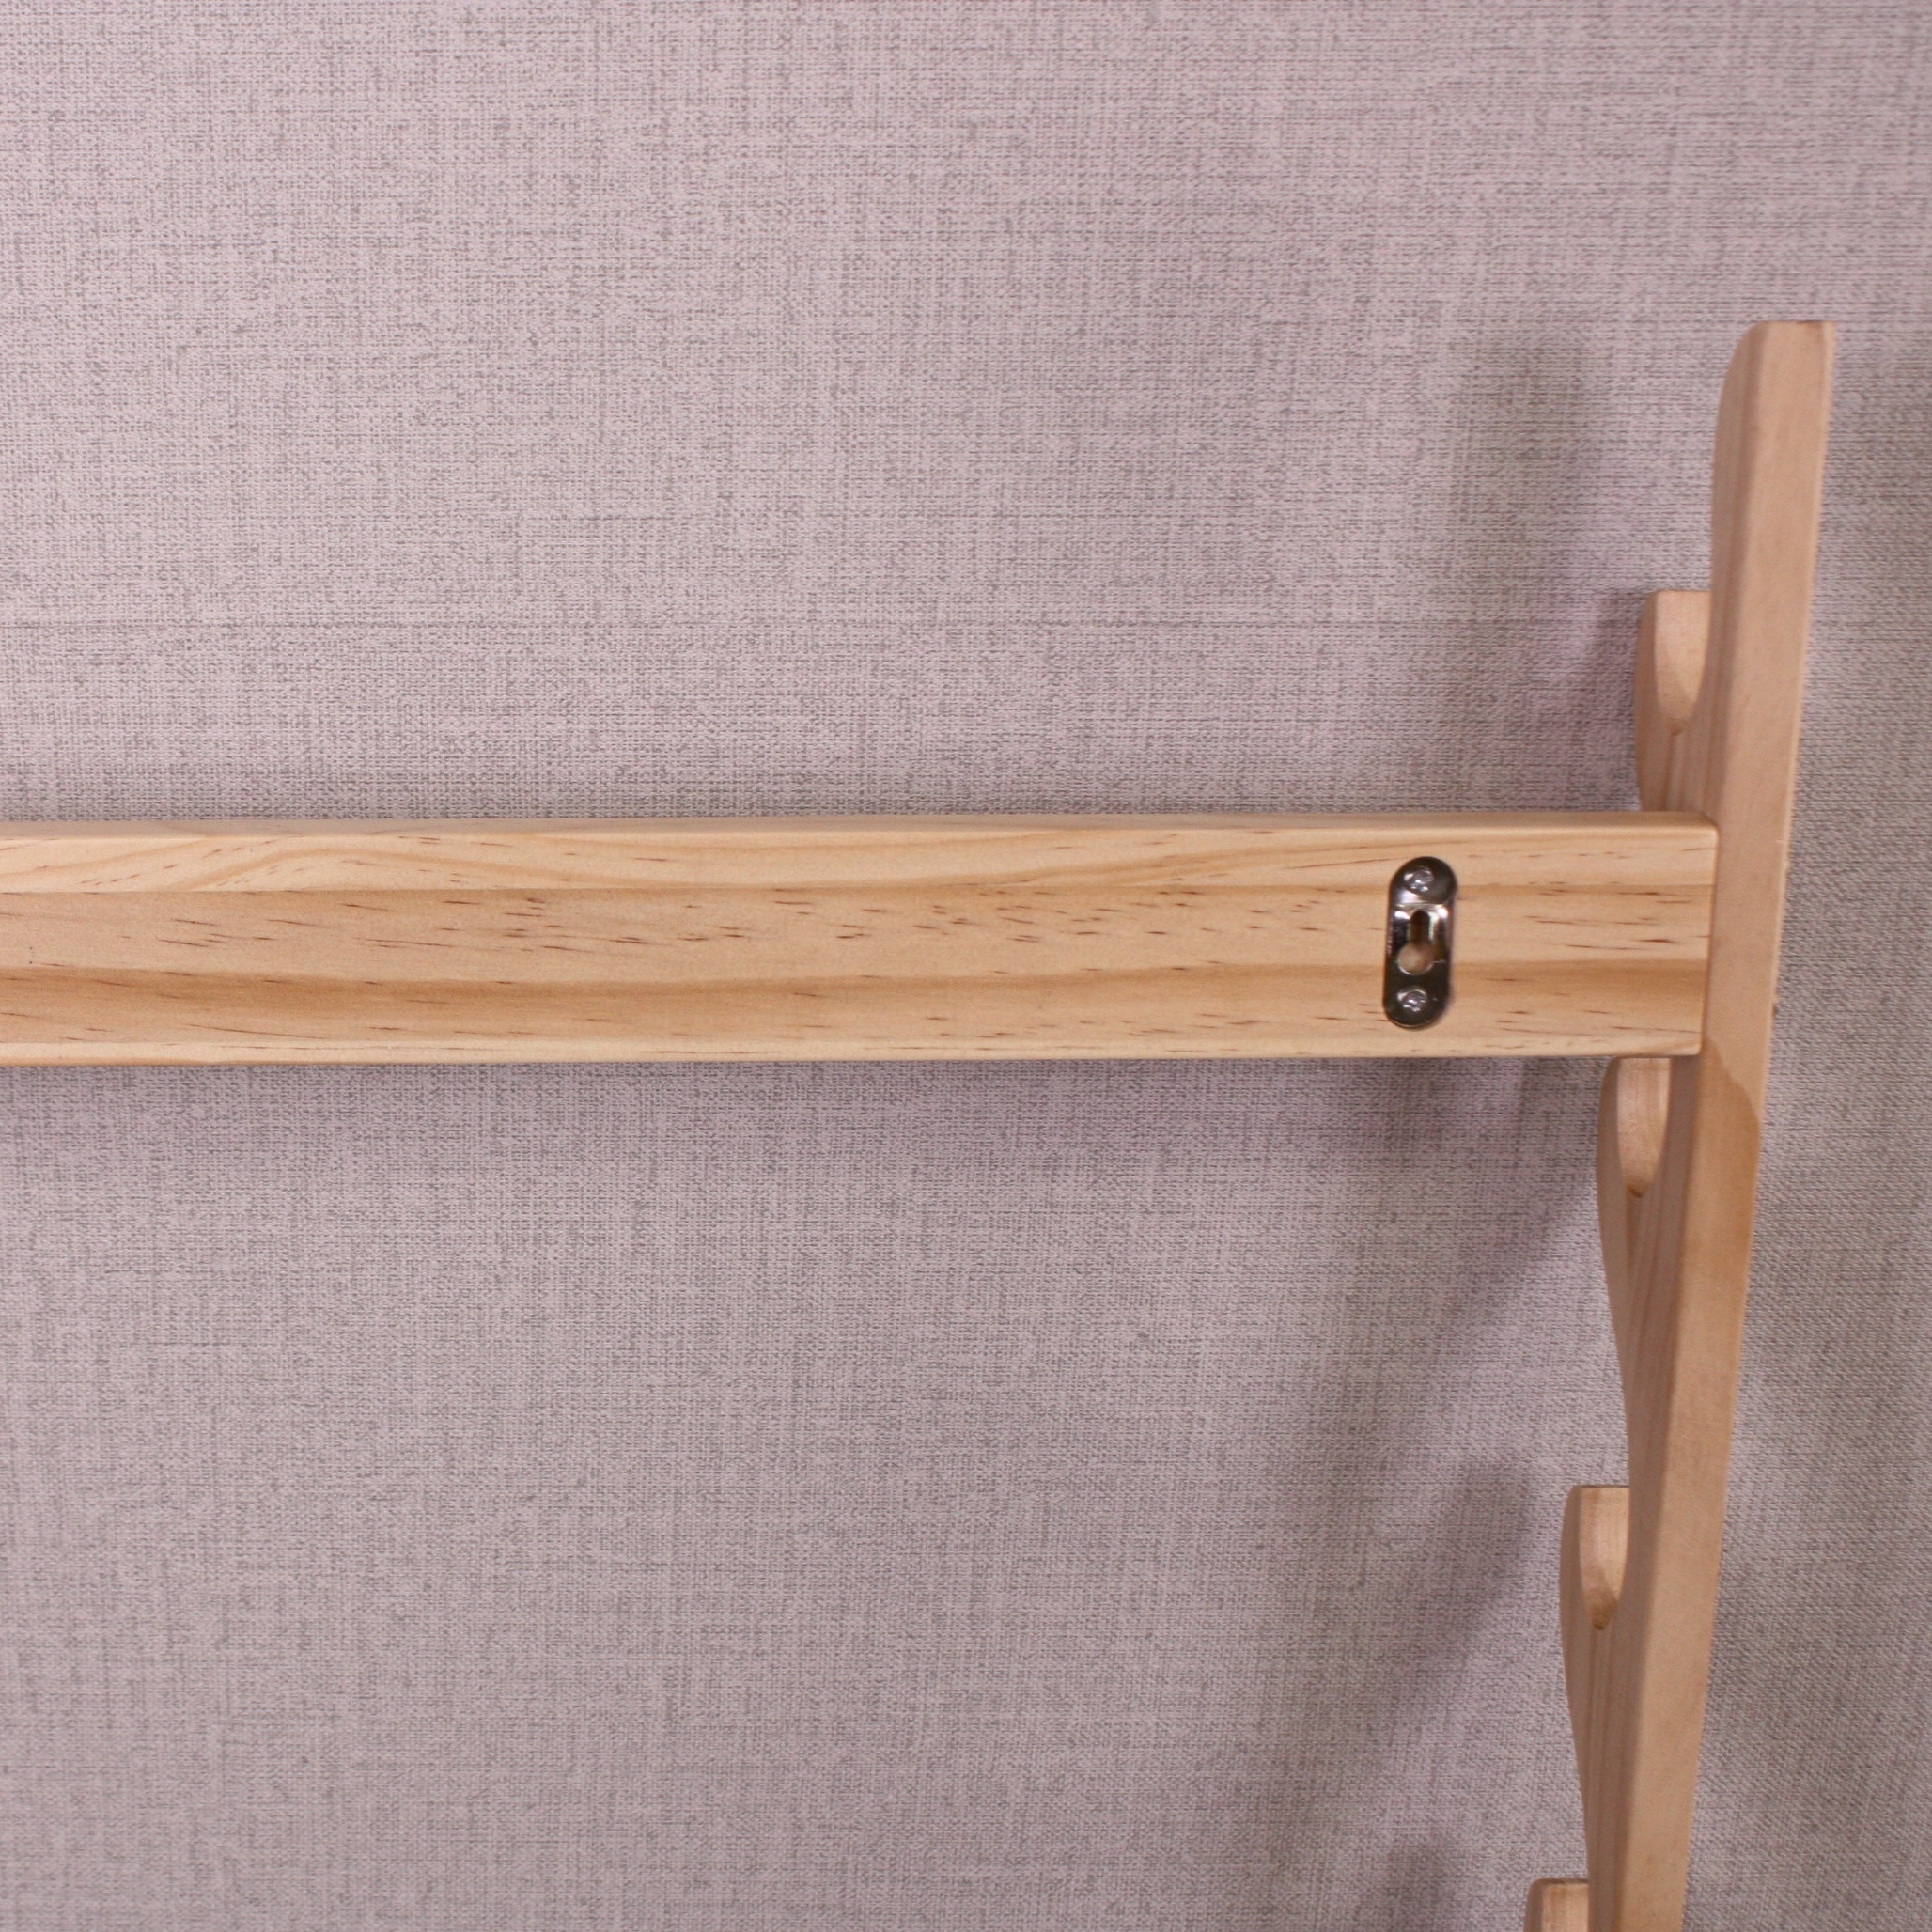 Wall-Mounted Fishing Rod Holder - Conveniently Store and Organize Your  Fishing Gear